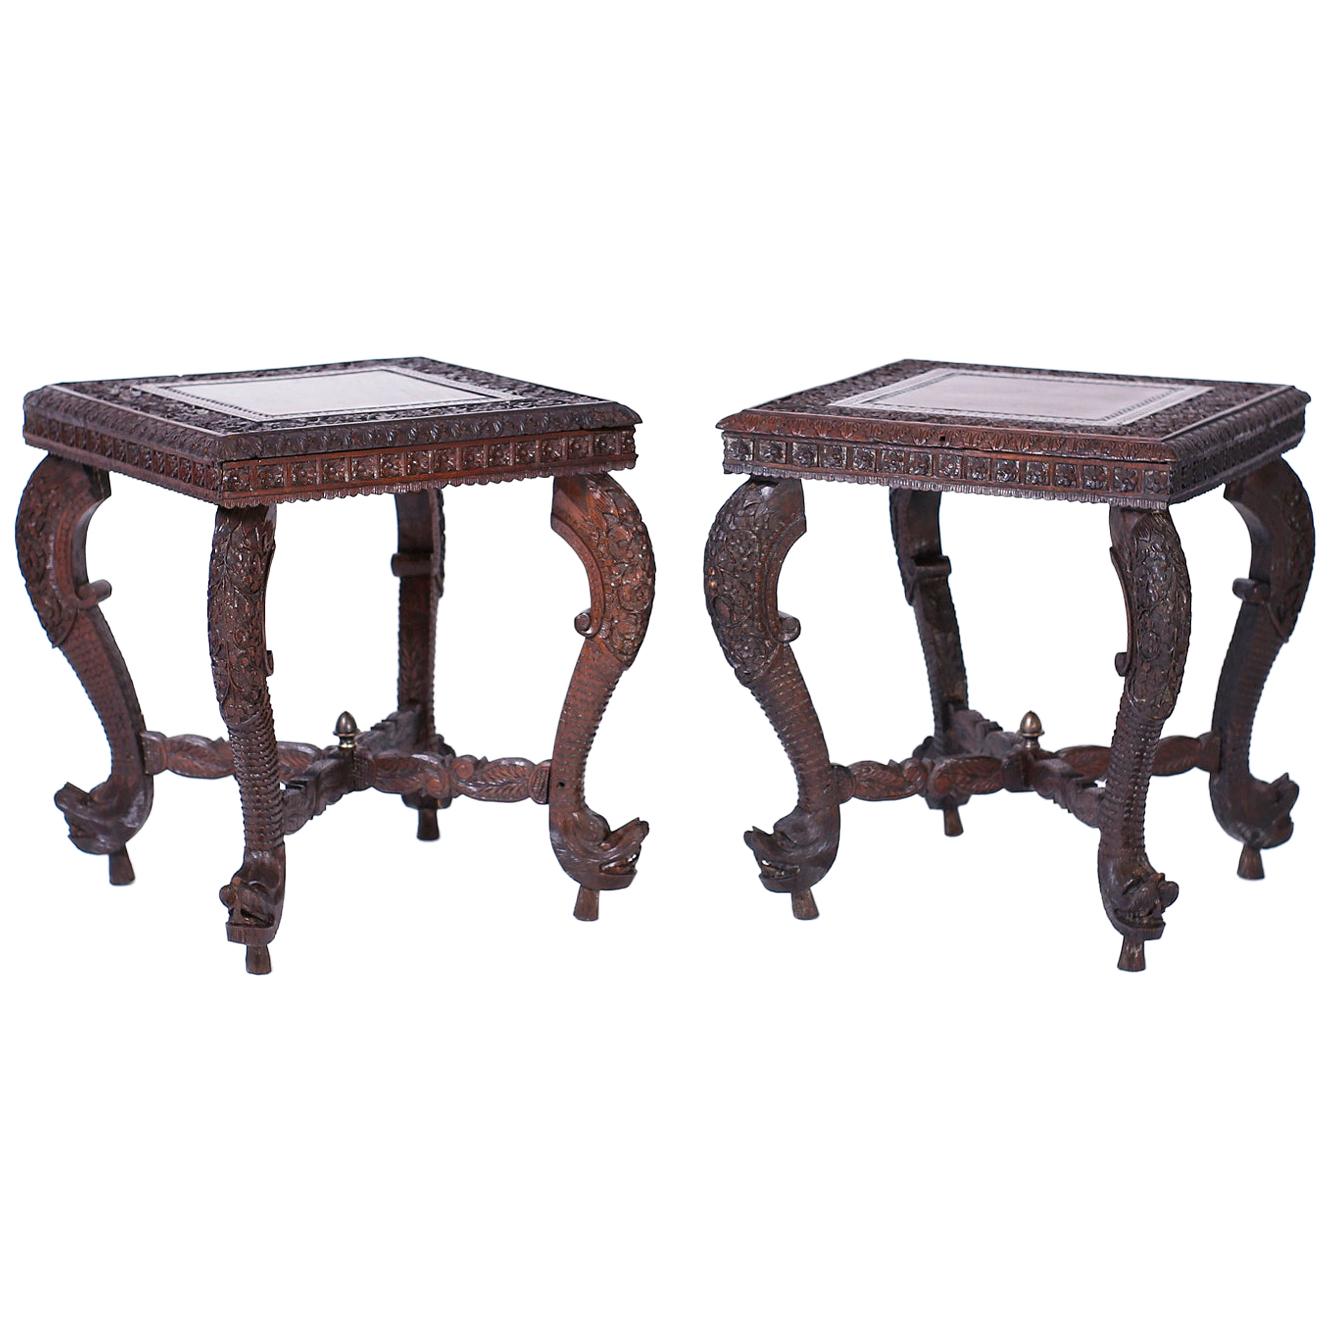 Pair of Anglo Indian Carved Stands or Tables